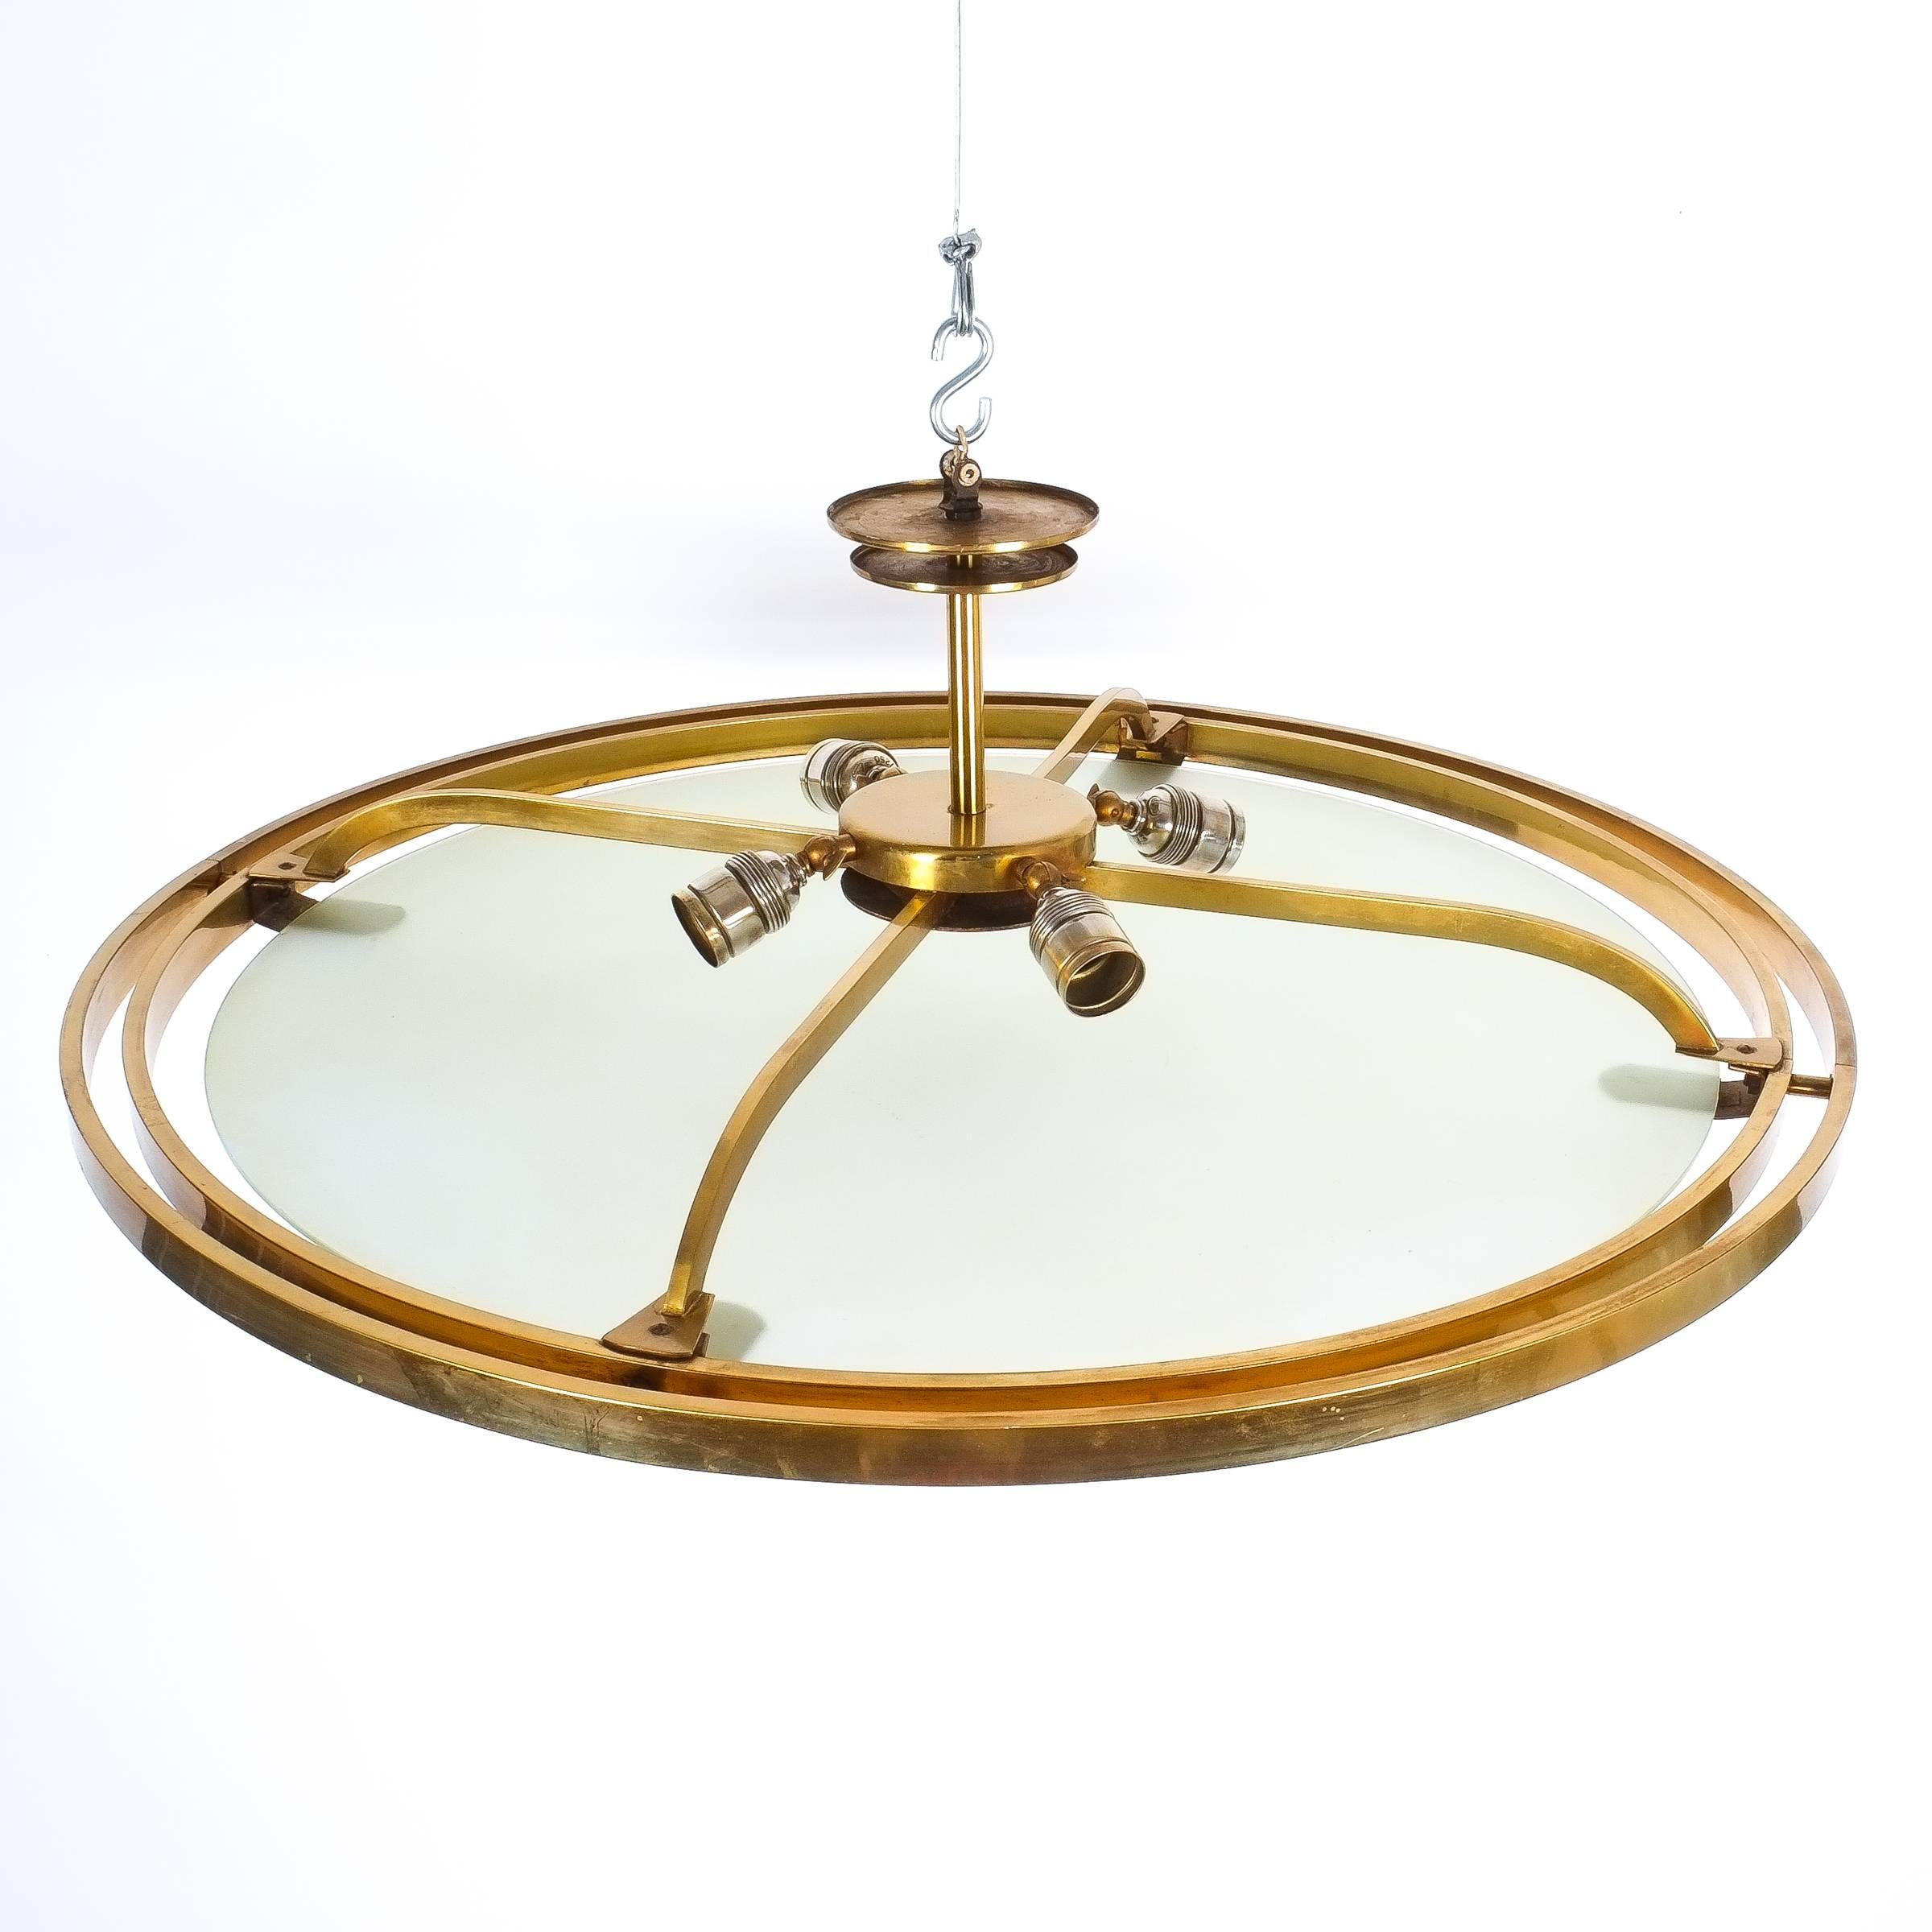 Burnished Art Deco Brass Satin Glass Graphical Ceiling Lamp Flush Mount UFO, circa 1920